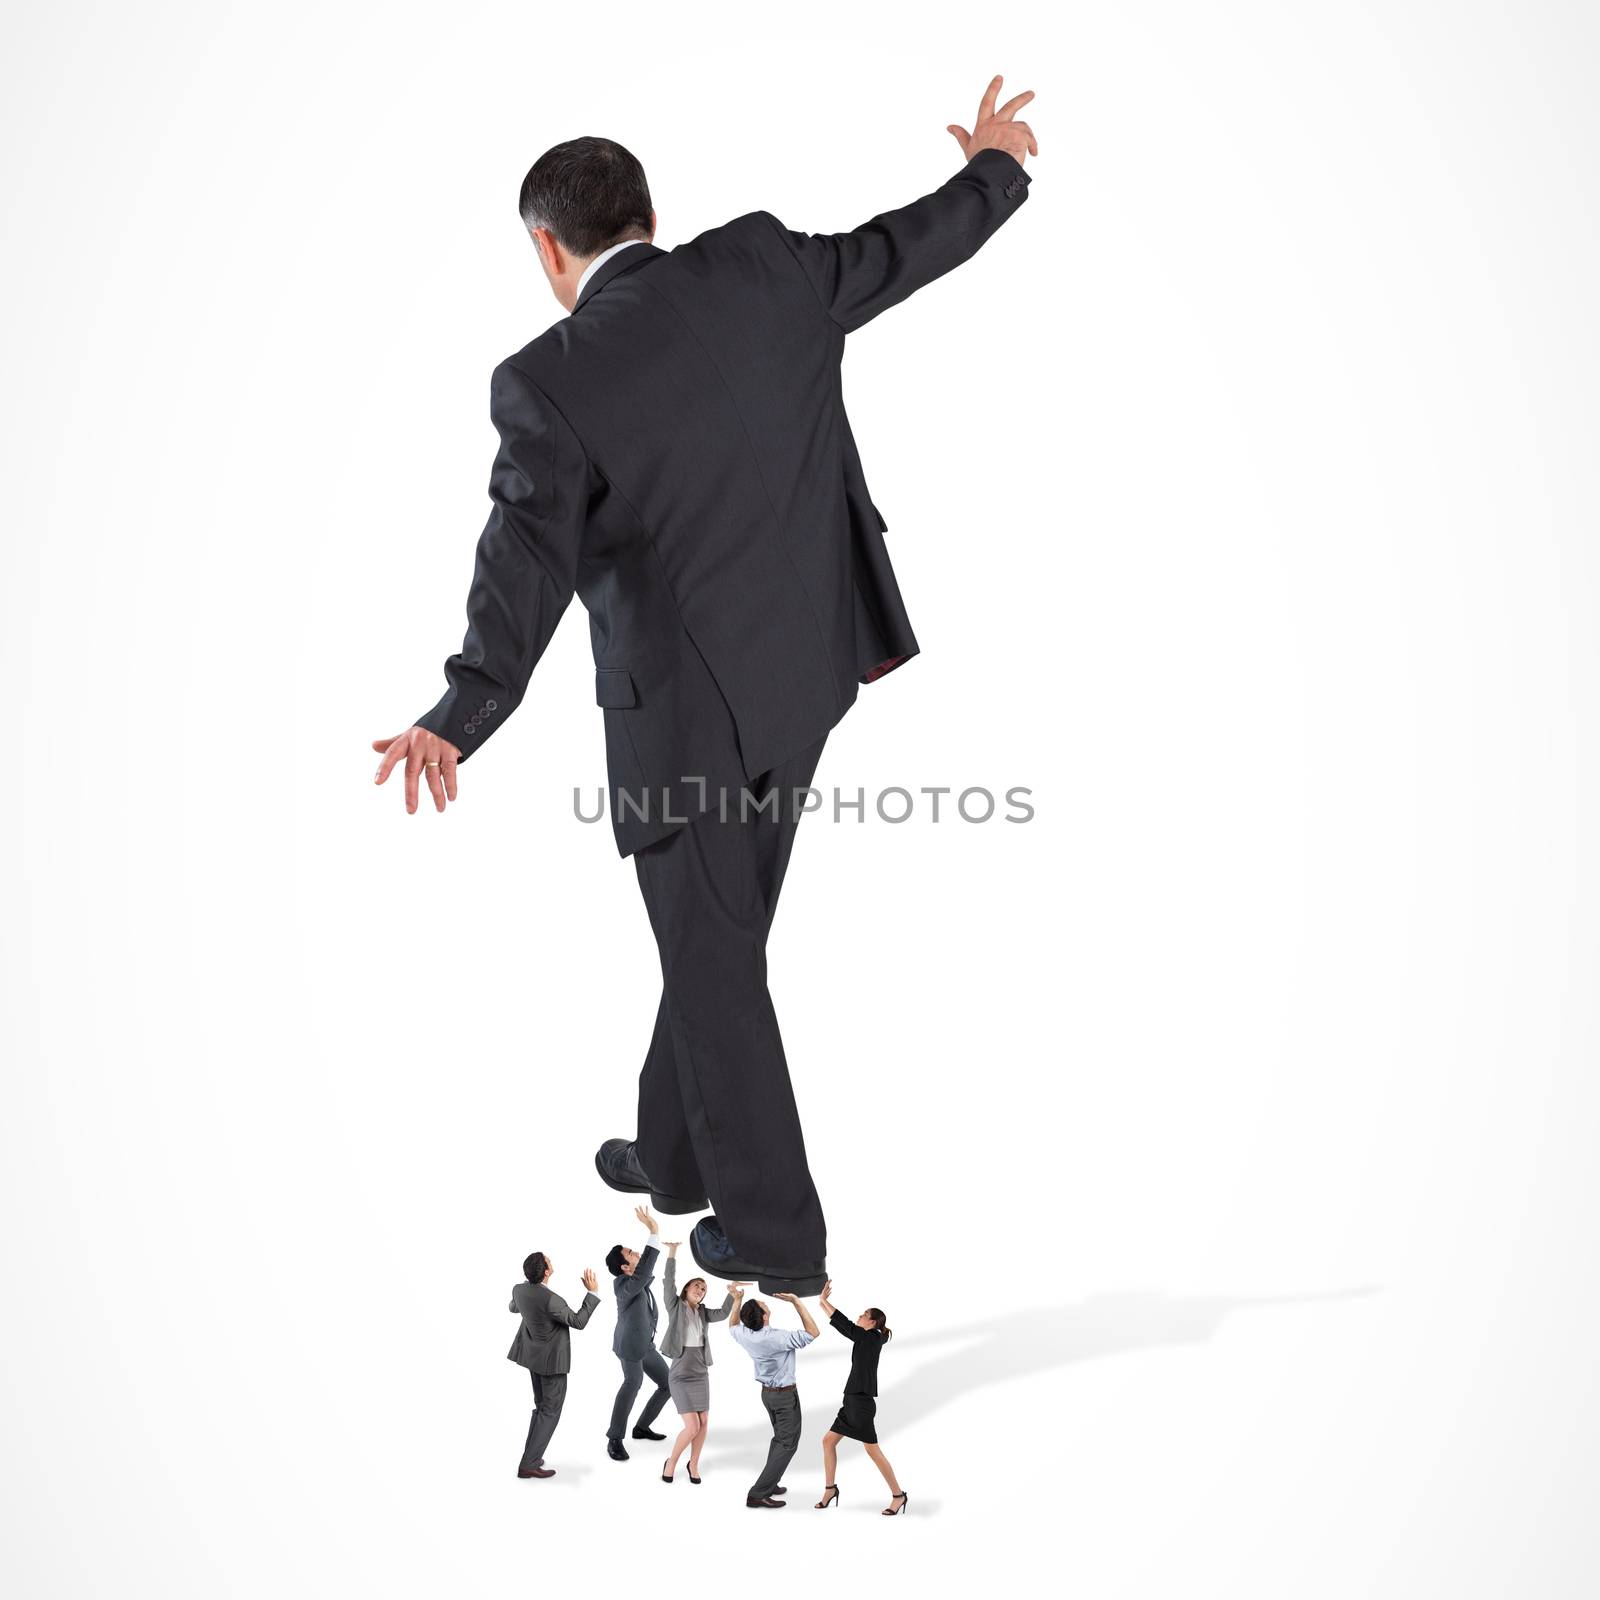 Business team supporting boss against white background